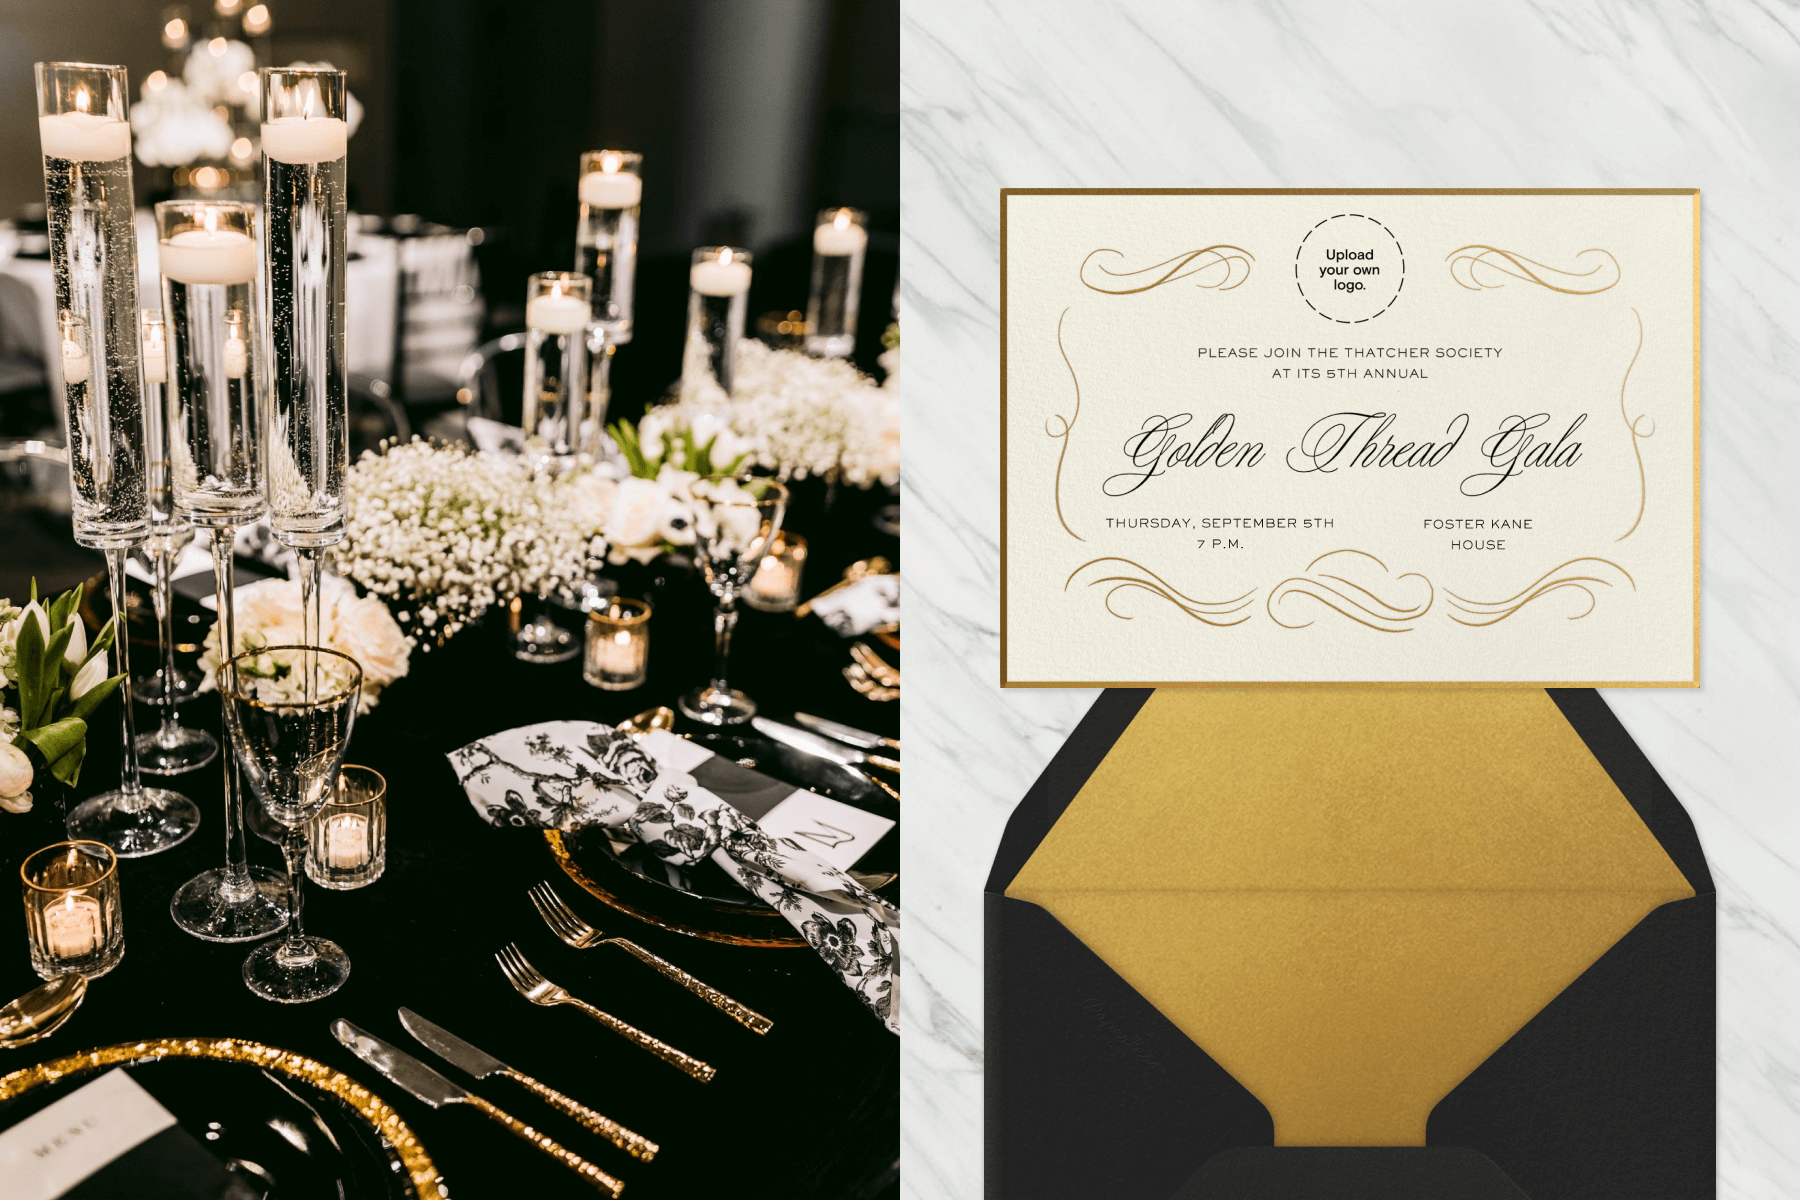 Left: A table is decorated with tall champagne glasses, a black tablecloth, gold and black tableware, votive candles, and flowers. Right: A black and gold invitation with delicate flourishes features calligraphy script that reads “golden thread gala” above a matching gold envelope liner.